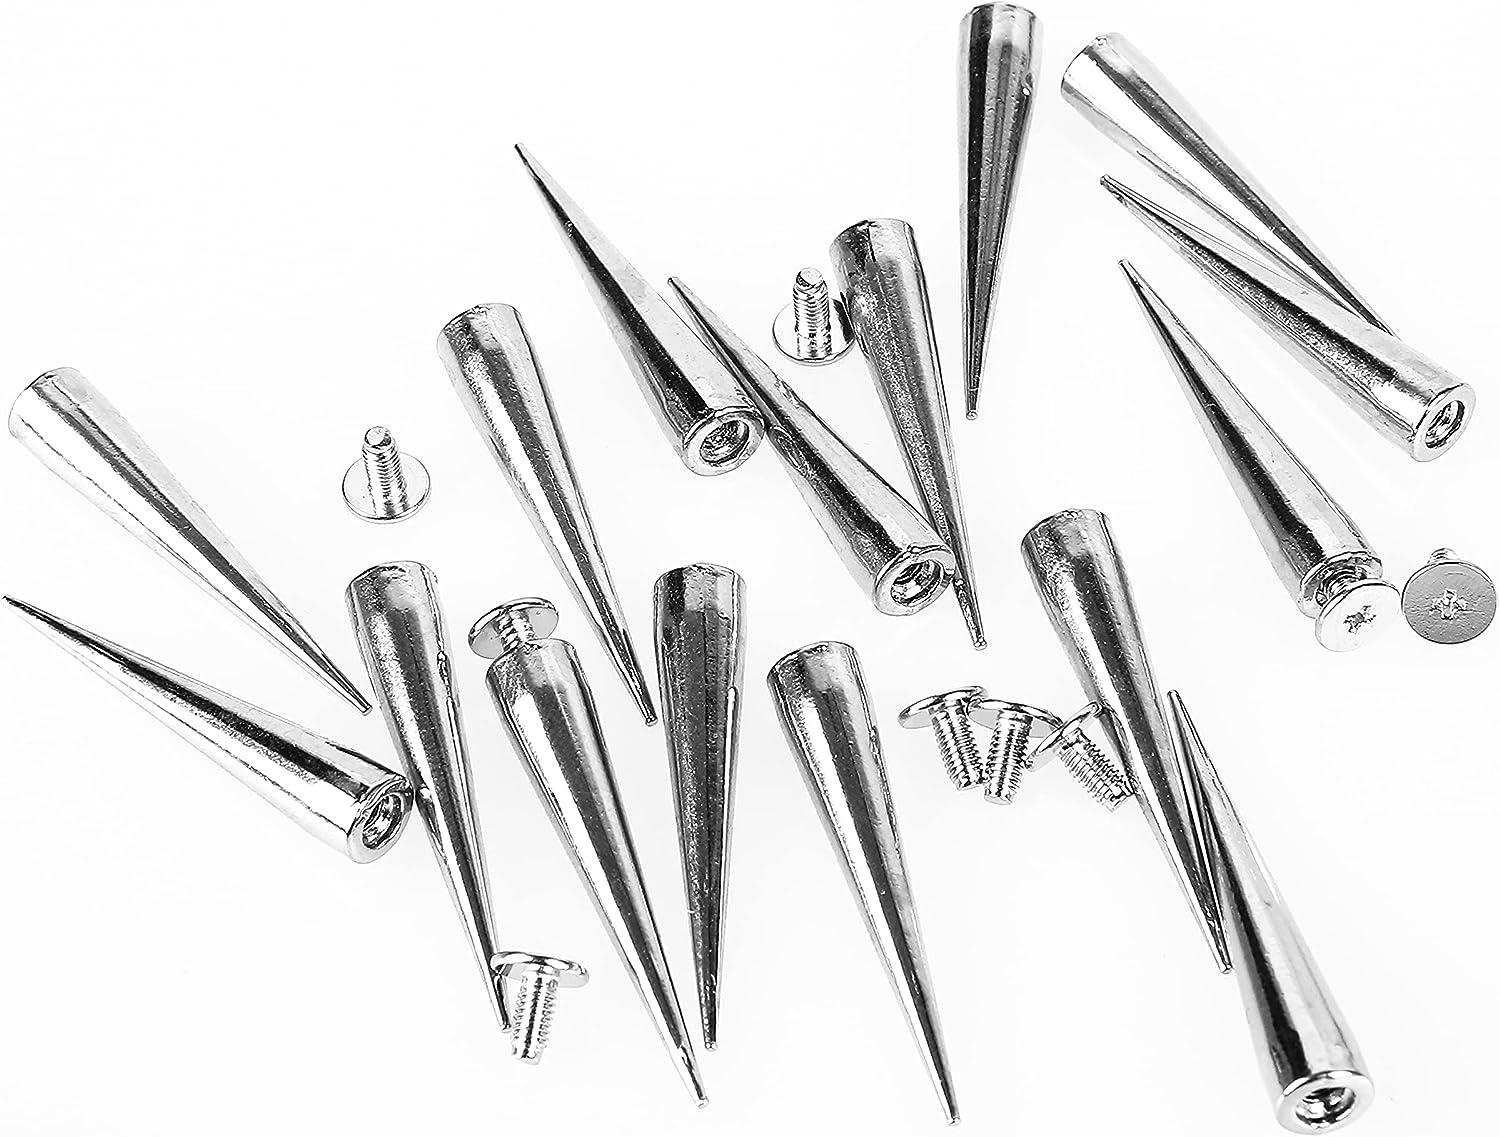 ULTNICE Metal Cone Spikes Screwback Studs DIY Leather Craft Punk Rivets  7x14mm () - 100 Pieces - Metal Cone Spikes Screwback Studs DIY Leather  Craft Punk Rivets 7x14mm () - 100 Pieces .